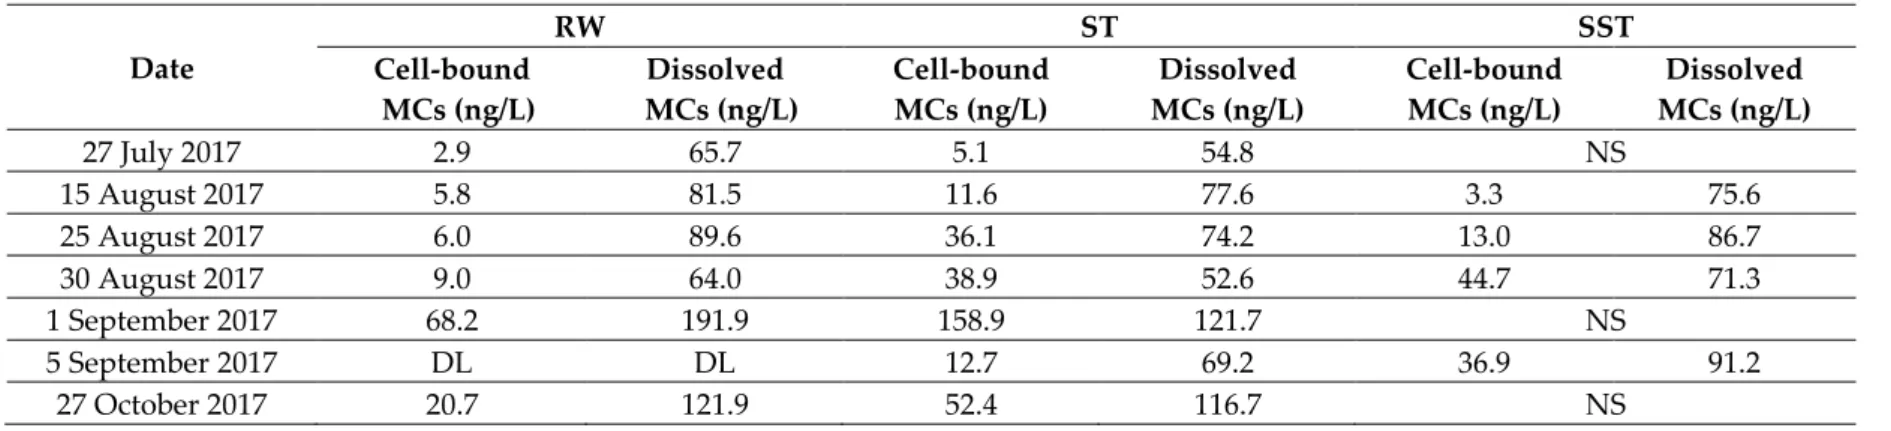 Table S2.  Concentrations of cell-bound and dissolved microcystins (MCs) in the RW (raw water), (ST) sludge holding tank and (SST) sludge holding tank